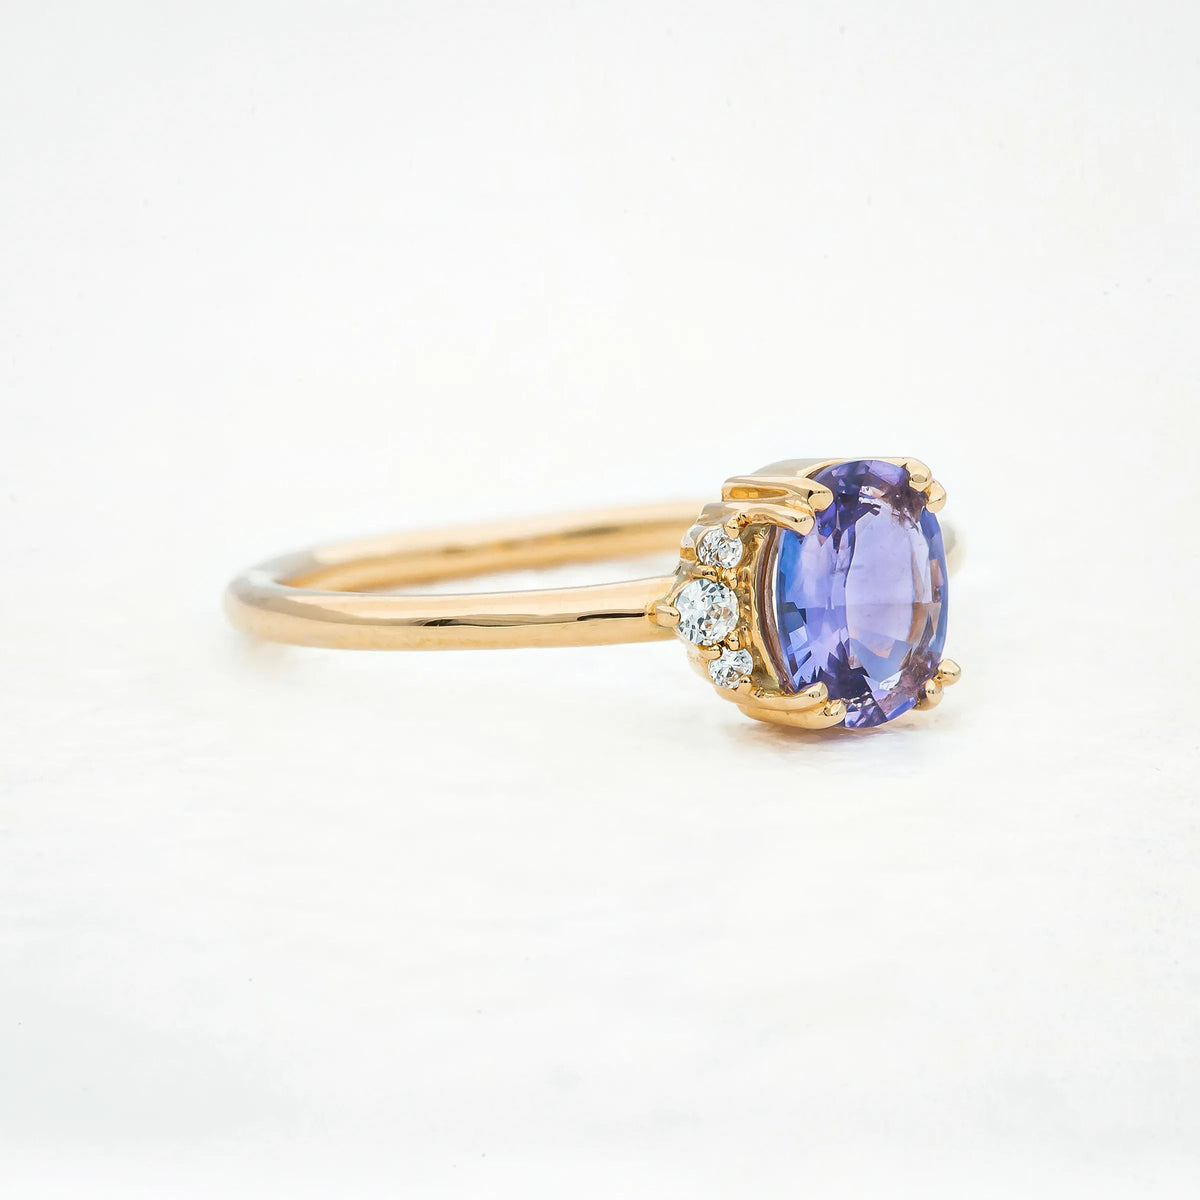 Lady in Waiting Ring, Oval Purple Sapphire with Diamonds - Boutee